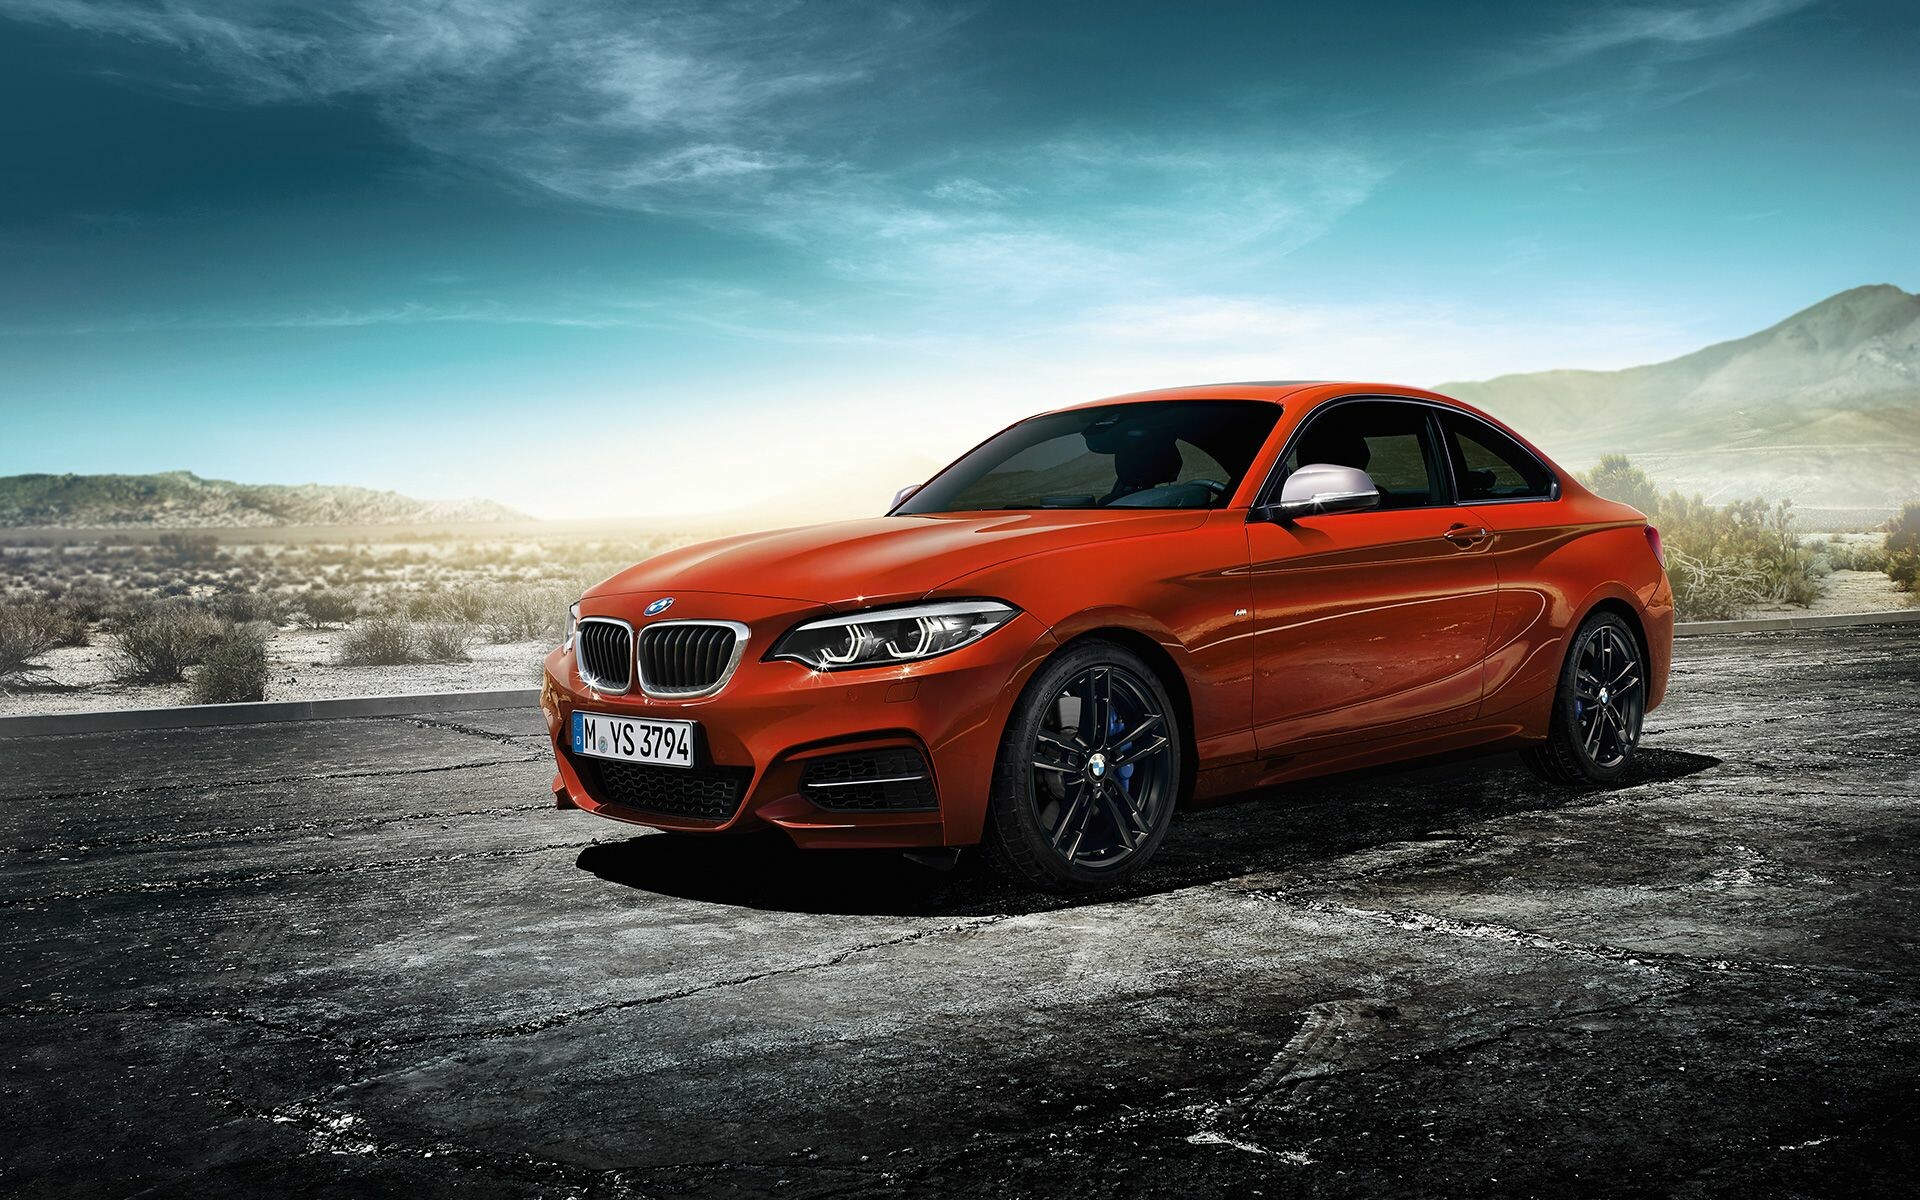 BMW 2 Series: The coupe version, Used as the basis of the high performance F87 M2 model. 1920x1200 HD Background.